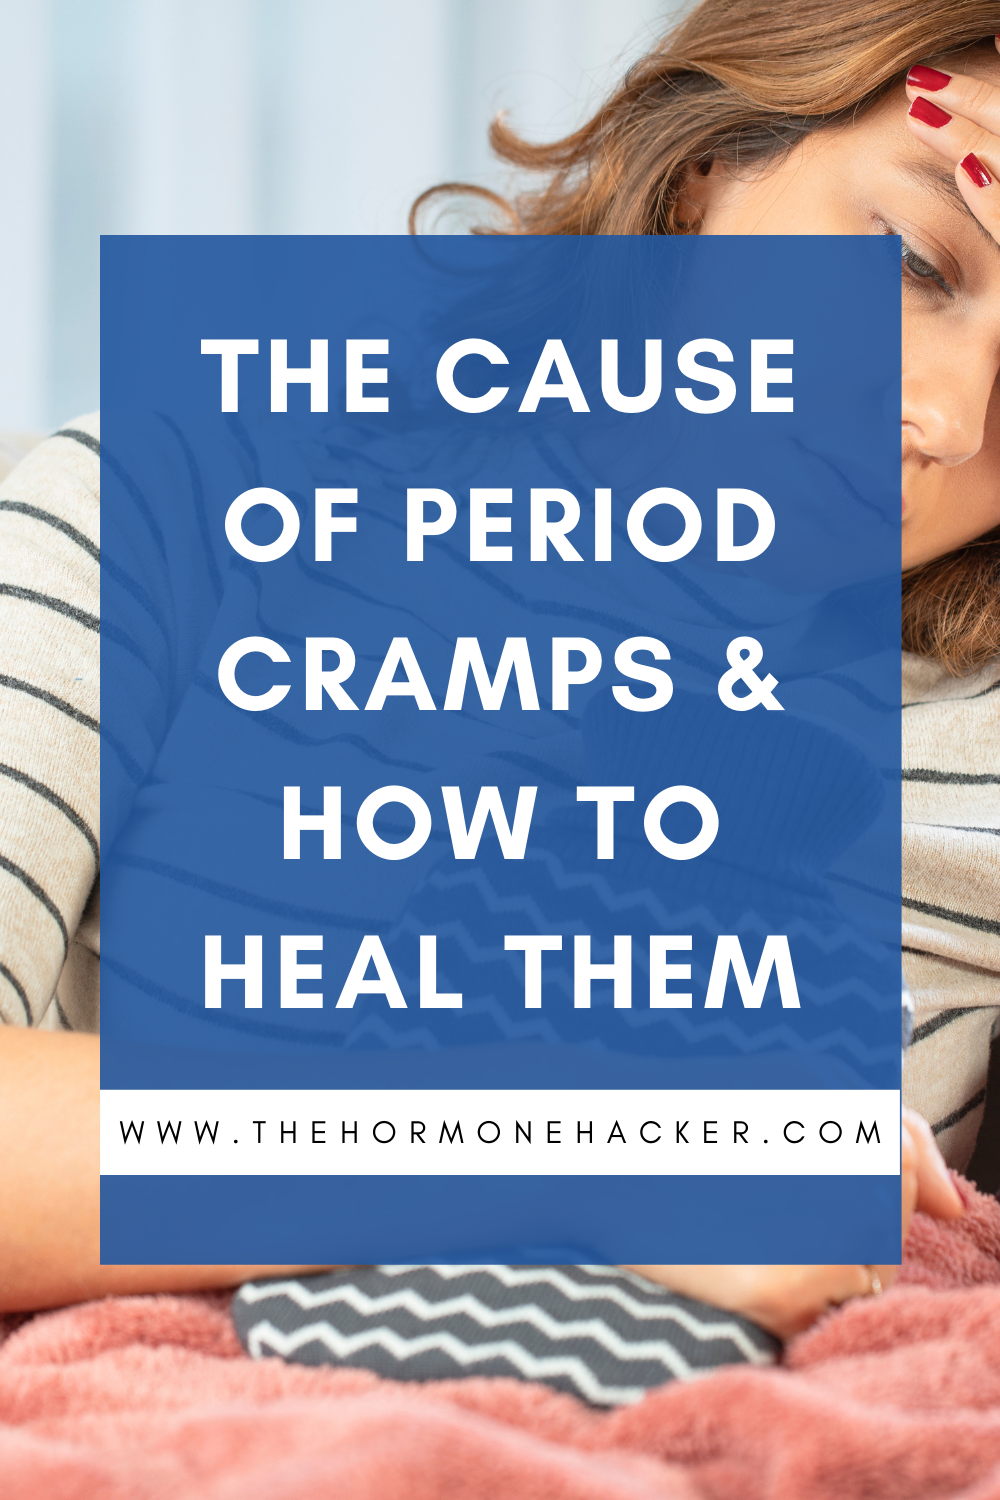 Period pain: what it is, its causes and what you can do to alleviate it